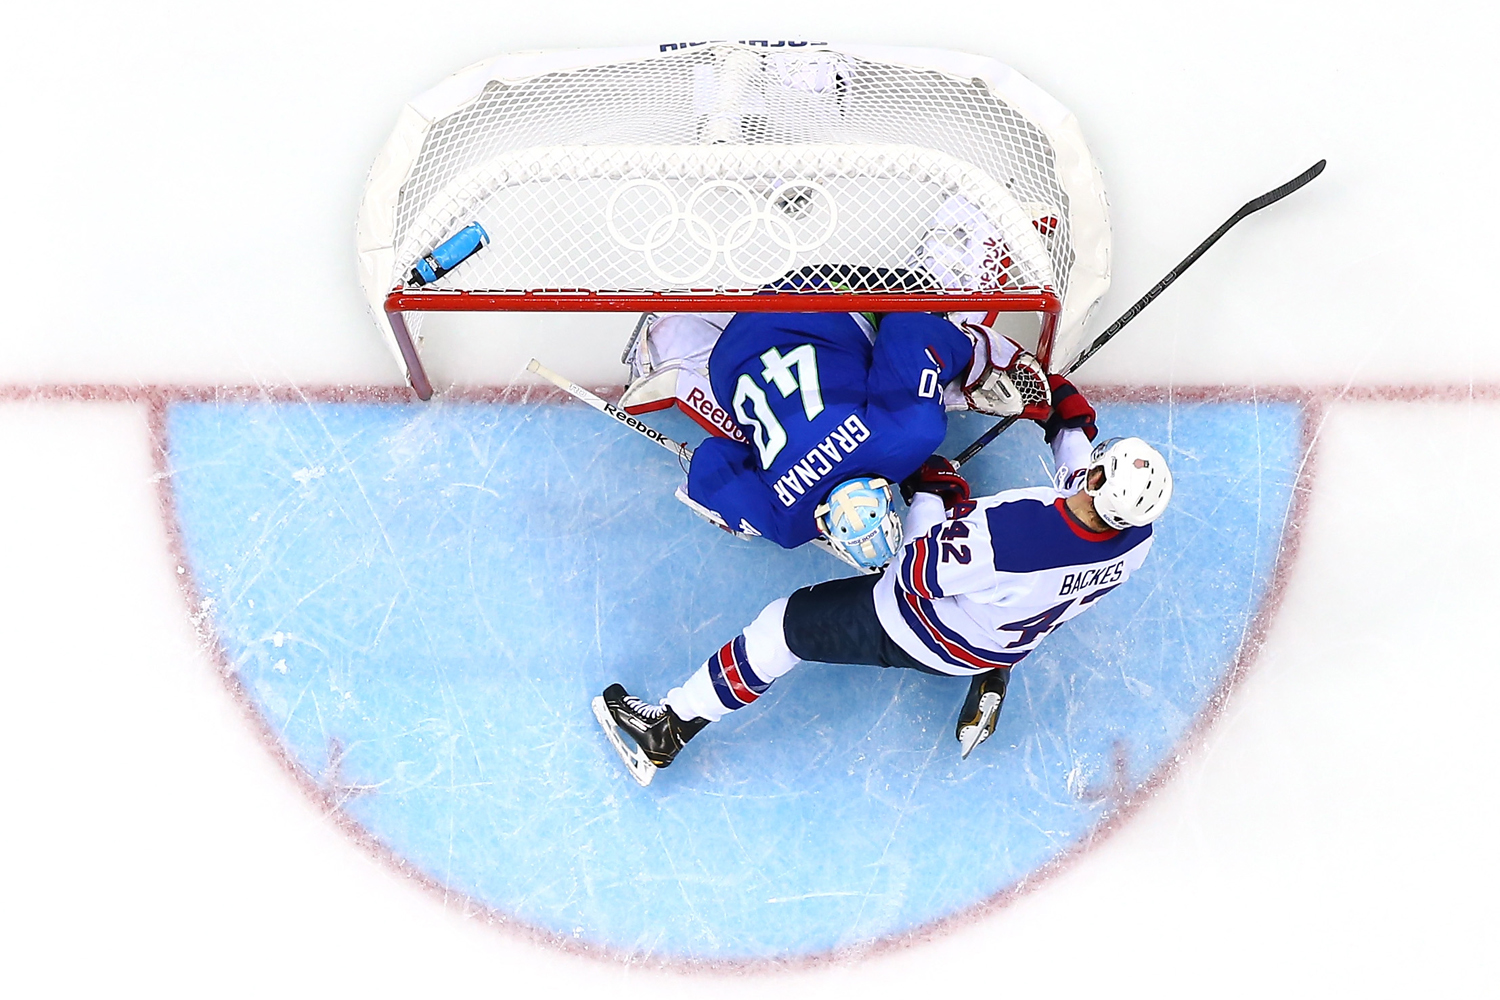 David Backes #42 of the United States collides with Luka Gracnar #40 of Slovenia in the second period during the Men's Ice Hockey Preliminary Round Group A game during the Sochi 2014 Winter Olympics at Shayba Arena on February 16, 2014 in Sochi, Russia.